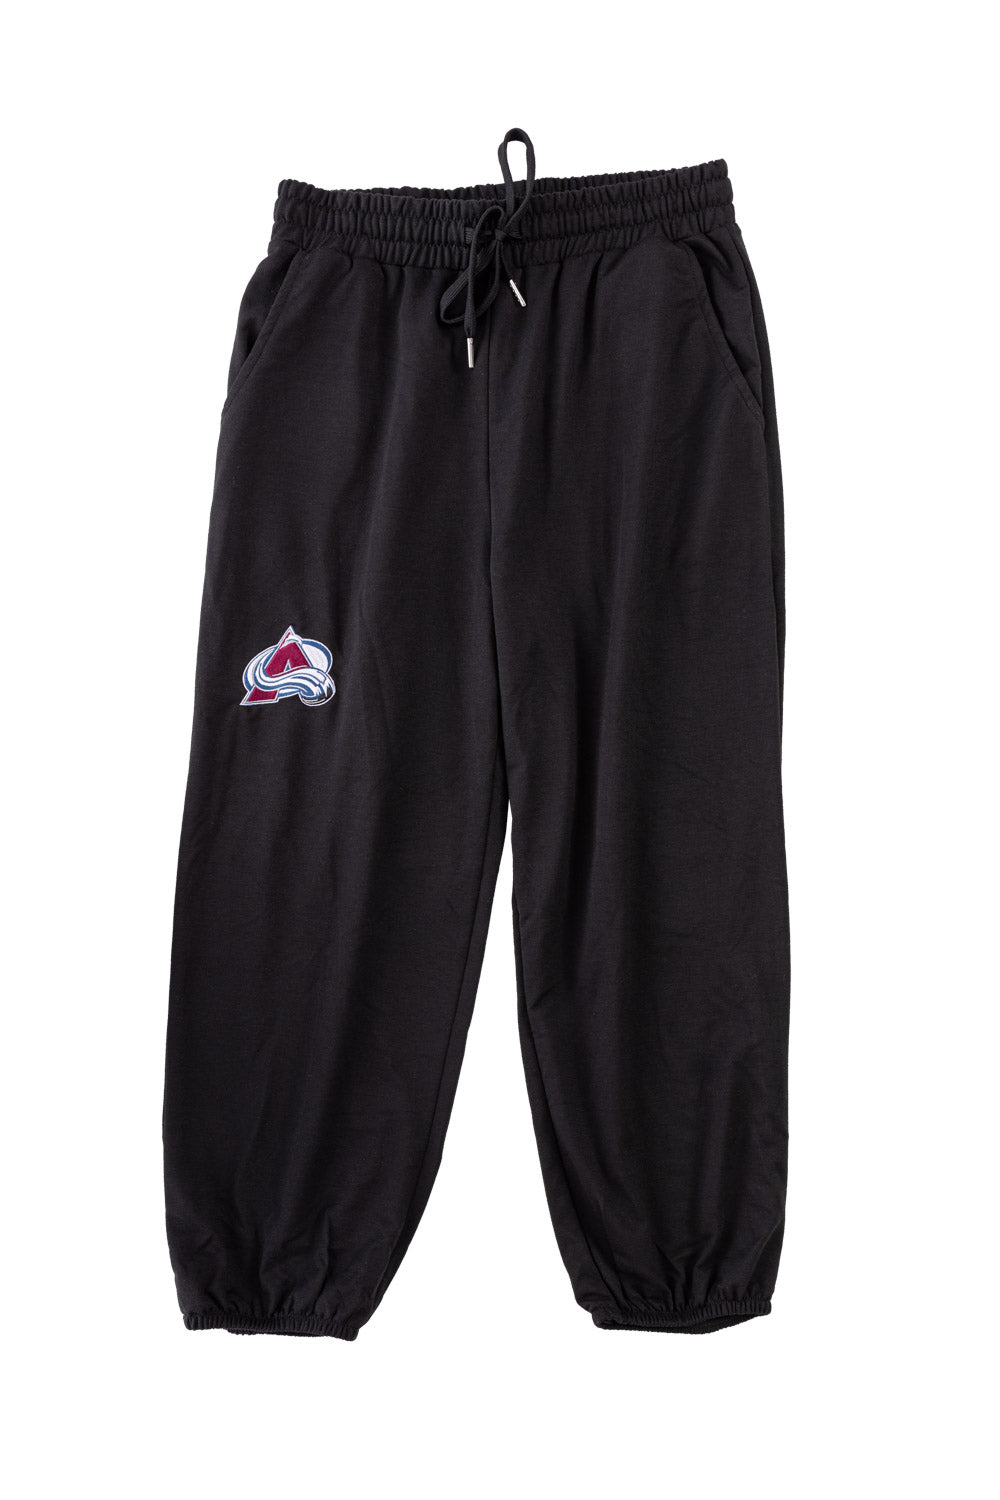 Colorado Avalanche Ladies Cropped Jogger Style Track Pants